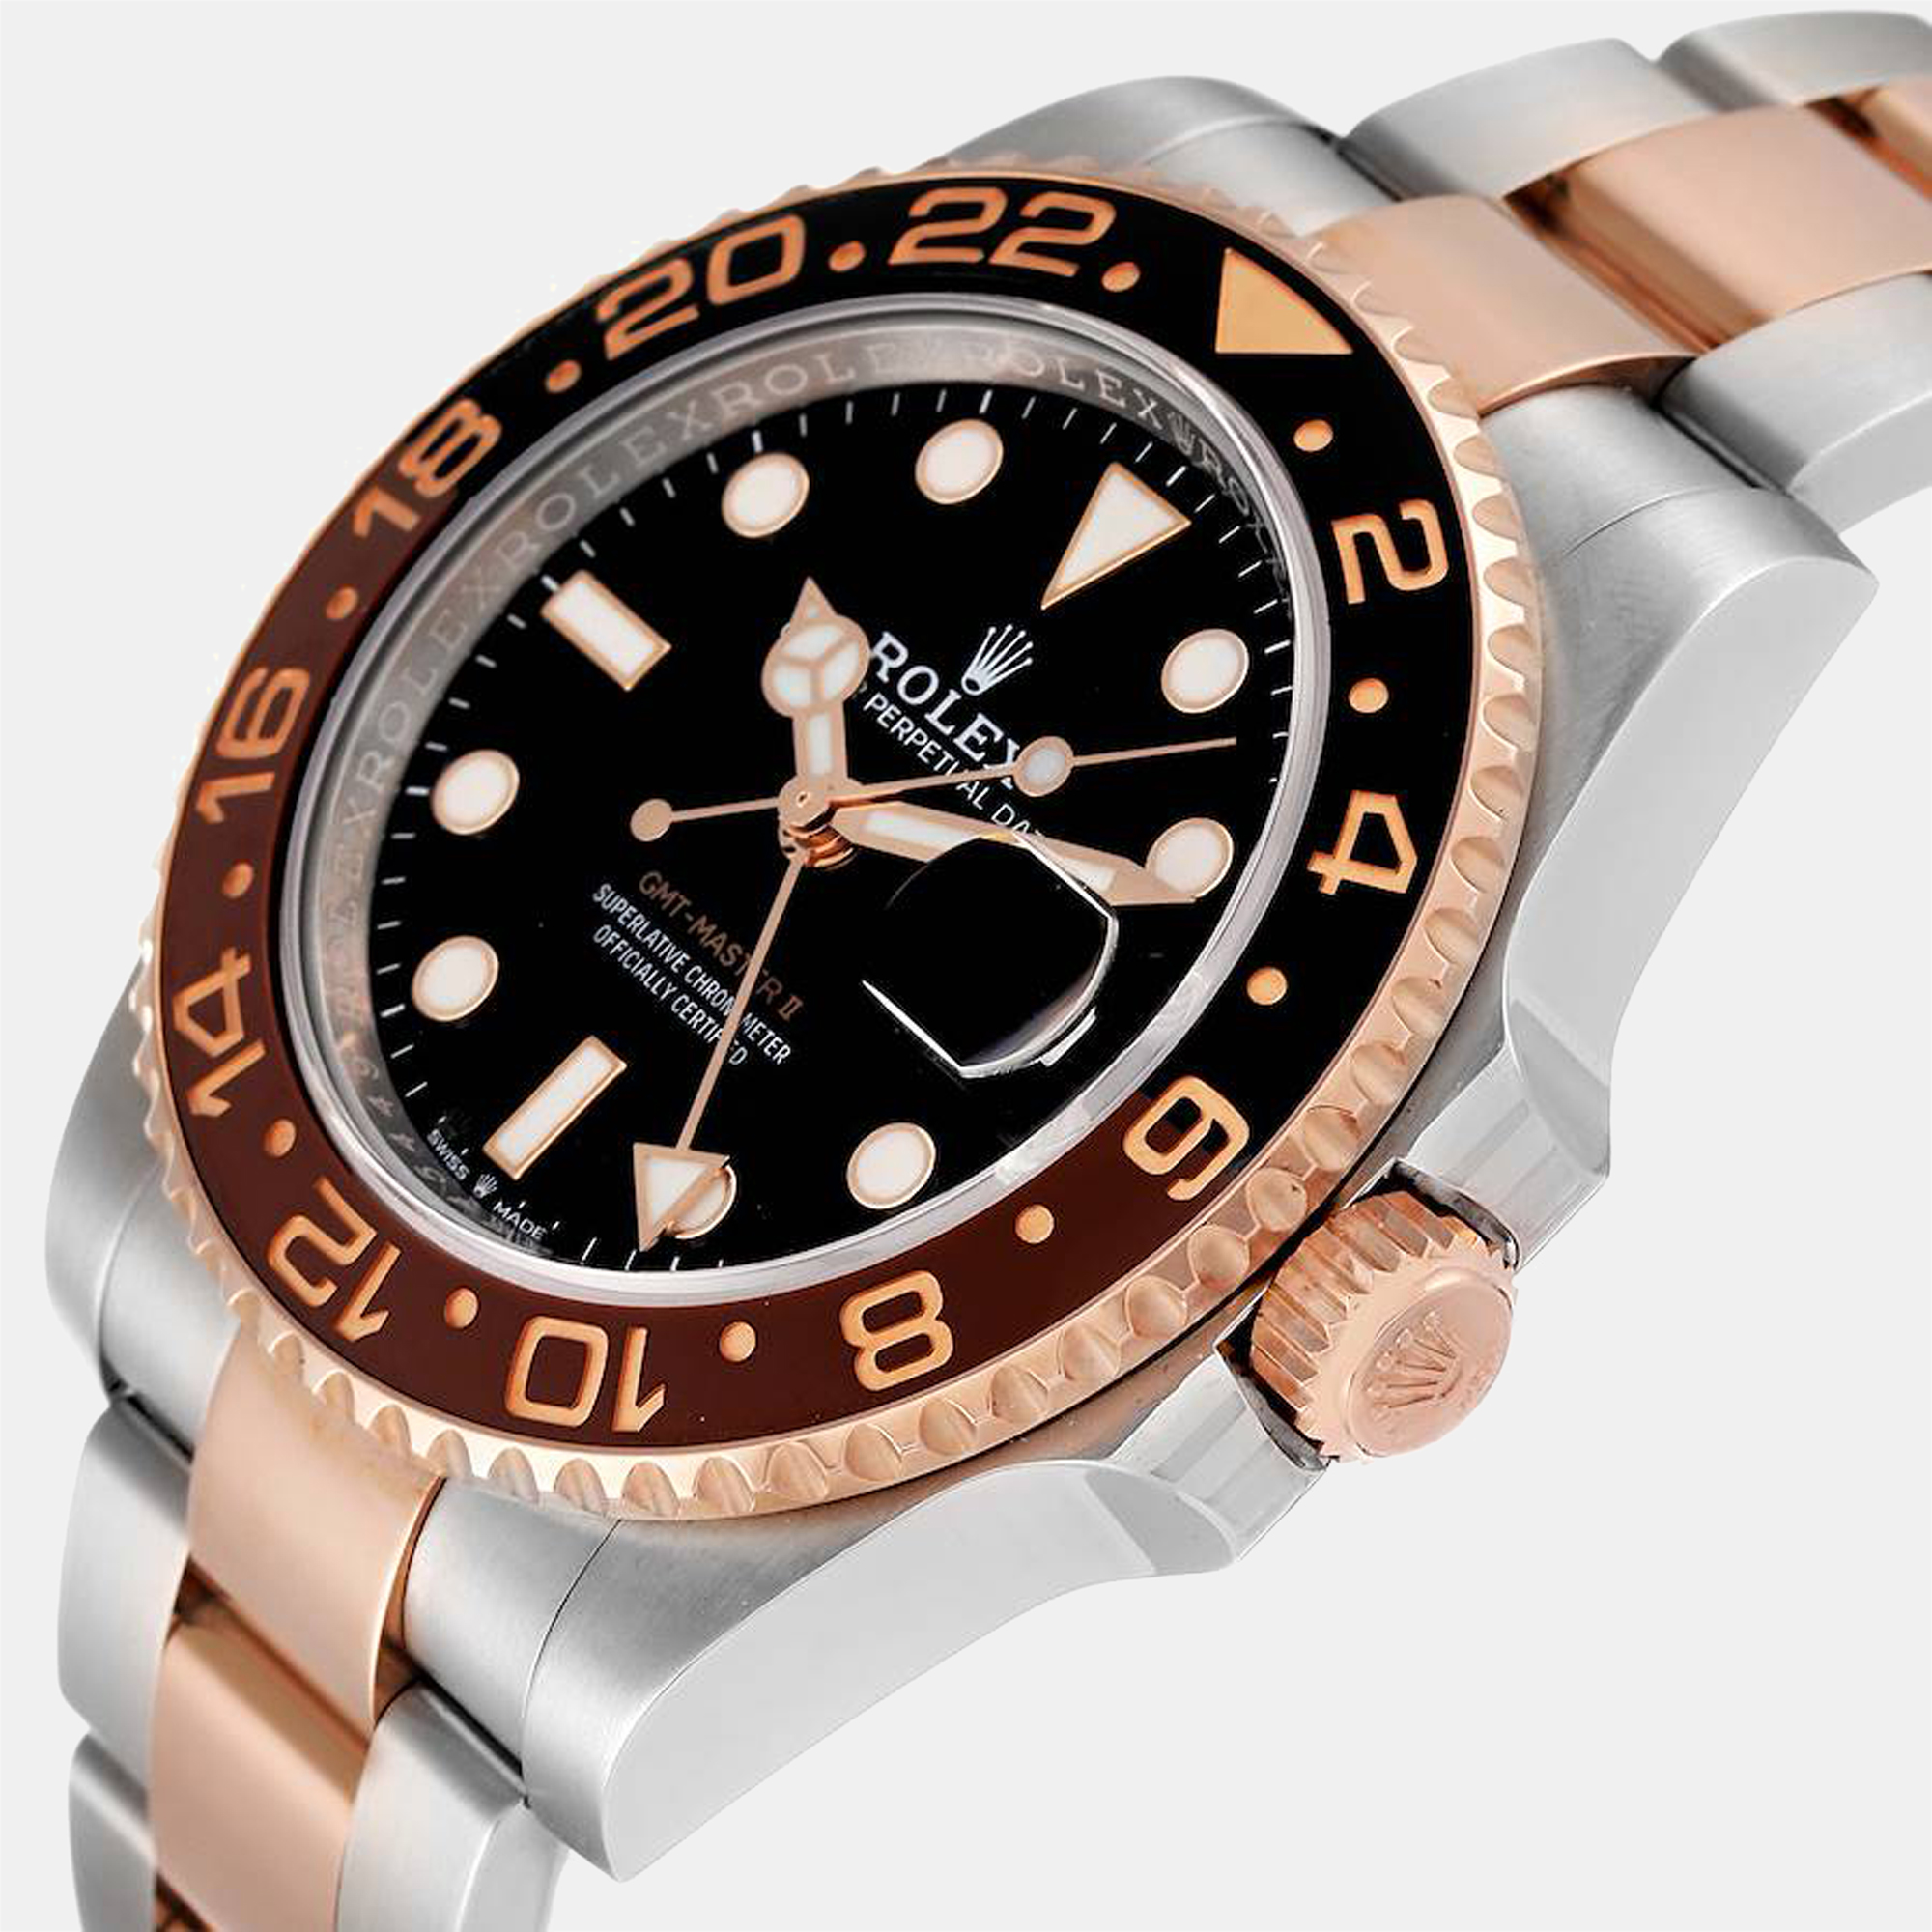 

Rolex Black 18K Rose Gold And Stainless Steel GMT-Master II 126711 Automatic Men's Wristwatch 40 mm